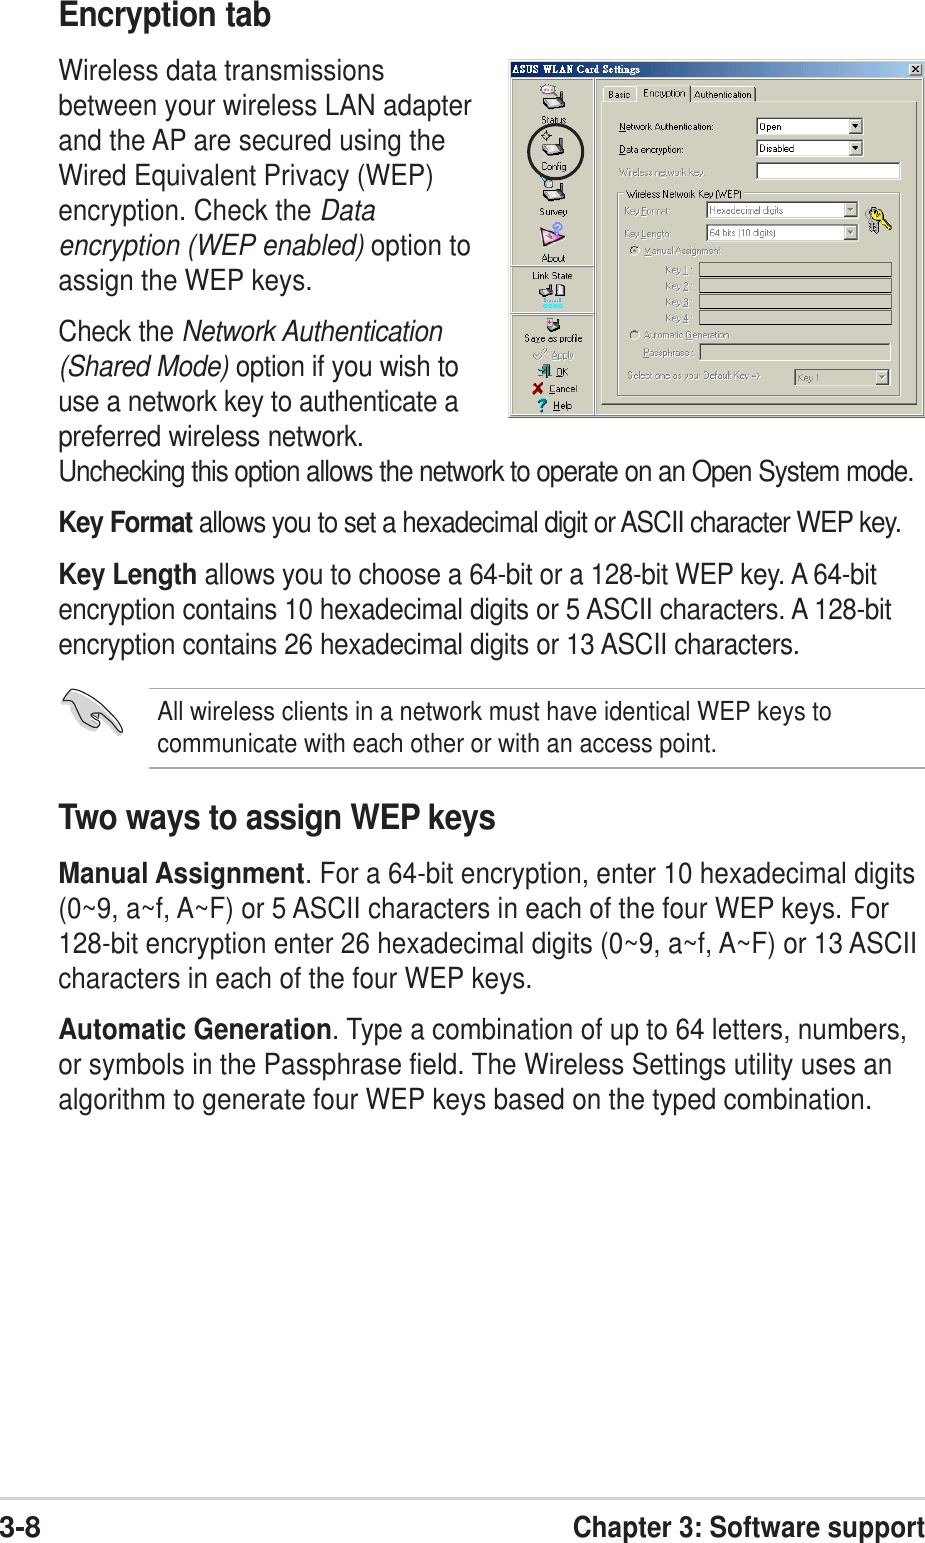 3-8Chapter 3: Software supportEncryption tabWireless data transmissionsbetween your wireless LAN adapterand the AP are secured using theWired Equivalent Privacy (WEP)encryption. Check the Dataencryption (WEP enabled) option toassign the WEP keys.Check the Network Authentication(Shared Mode) option if you wish touse a network key to authenticate apreferred wireless network.Unchecking this option allows the network to operate on an Open System mode.Key Format allows you to set a hexadecimal digit or ASCII character WEP key.Key Length allows you to choose a 64-bit or a 128-bit WEP key. A 64-bitencryption contains 10 hexadecimal digits or 5 ASCII characters. A 128-bitencryption contains 26 hexadecimal digits or 13 ASCII characters.Two ways to assign WEP keysManual Assignment. For a 64-bit encryption, enter 10 hexadecimal digits(0~9, a~f, A~F) or 5 ASCII characters in each of the four WEP keys. For128-bit encryption enter 26 hexadecimal digits (0~9, a~f, A~F) or 13 ASCIIcharacters in each of the four WEP keys.Automatic Generation. Type a combination of up to 64 letters, numbers,or symbols in the Passphrase field. The Wireless Settings utility uses analgorithm to generate four WEP keys based on the typed combination.All wireless clients in a network must have identical WEP keys tocommunicate with each other or with an access point.